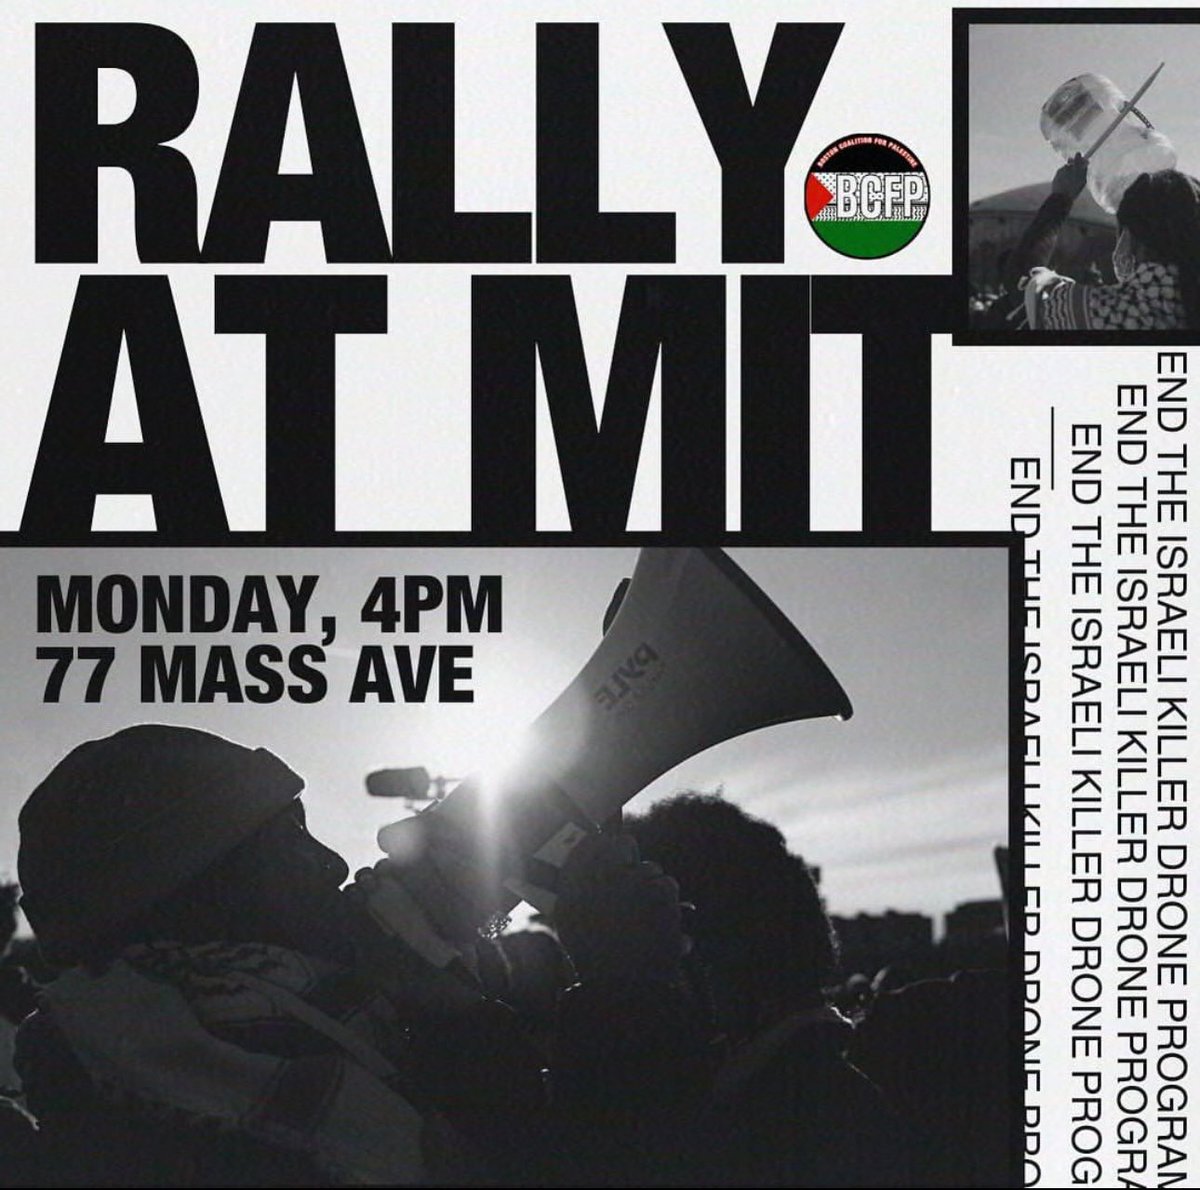 NO MORE SCIENCE FOR GENOCIDE! Israel's Ministry of Defense pays MIT millions of dollars to develop tools to support the Israeli occupation and genocide of Palestinians. The students & researchers at MIT are demanding: MIT, cut all research ties with Israel! Join us today at 4! 🇵🇸